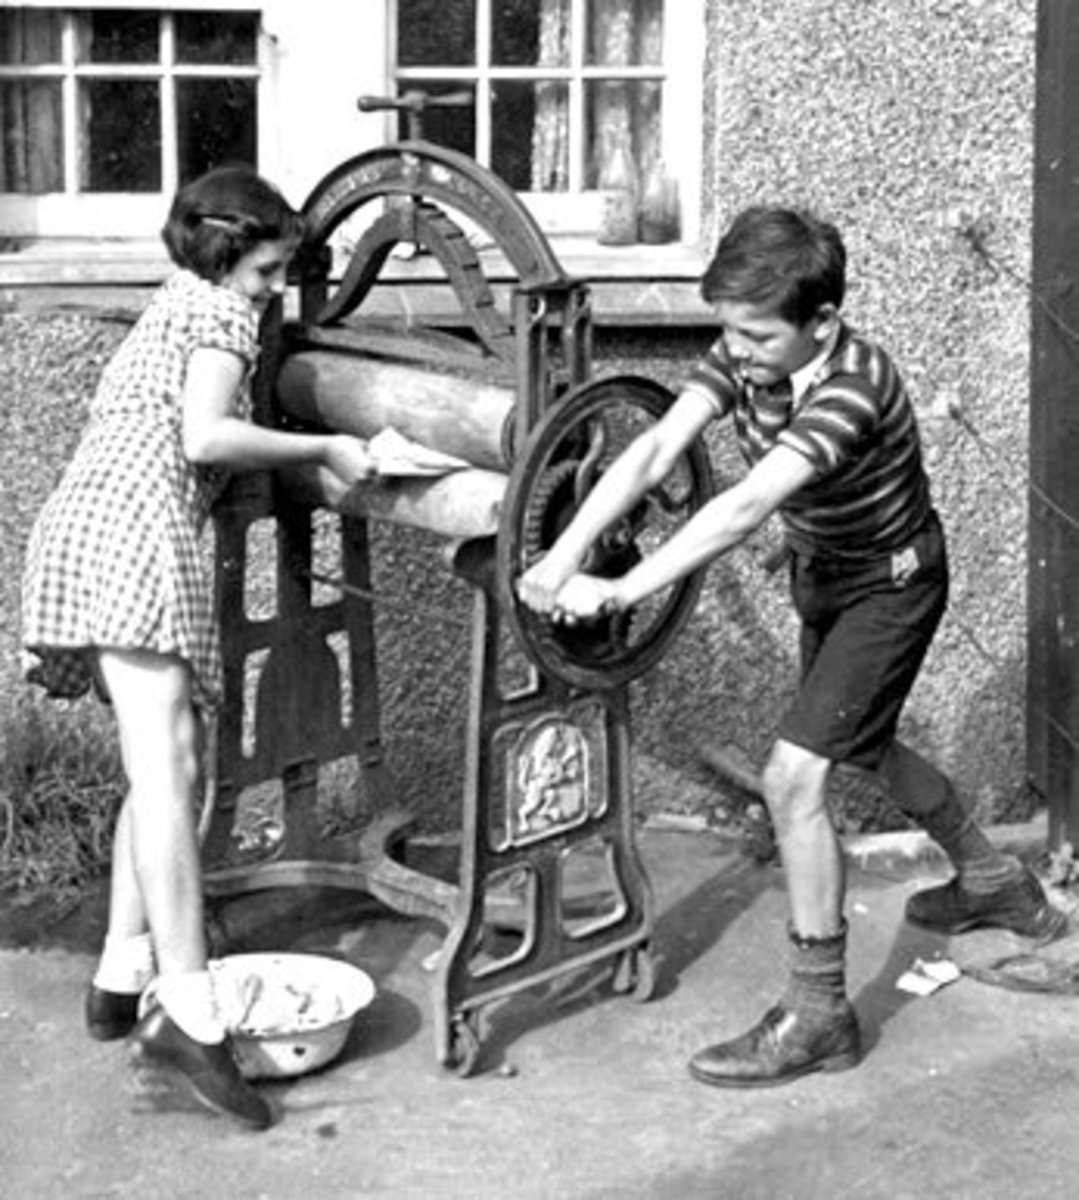 Mangling The Washing 13th September 1941: Peter and Pam putting washing through the mangle to wring it dry for their mother. Original Publication: Picture Post - 859 - The Life Of An Airman's Wife - pub. 1941 (Photo by Kurt Hutton / Picture Post / Ge